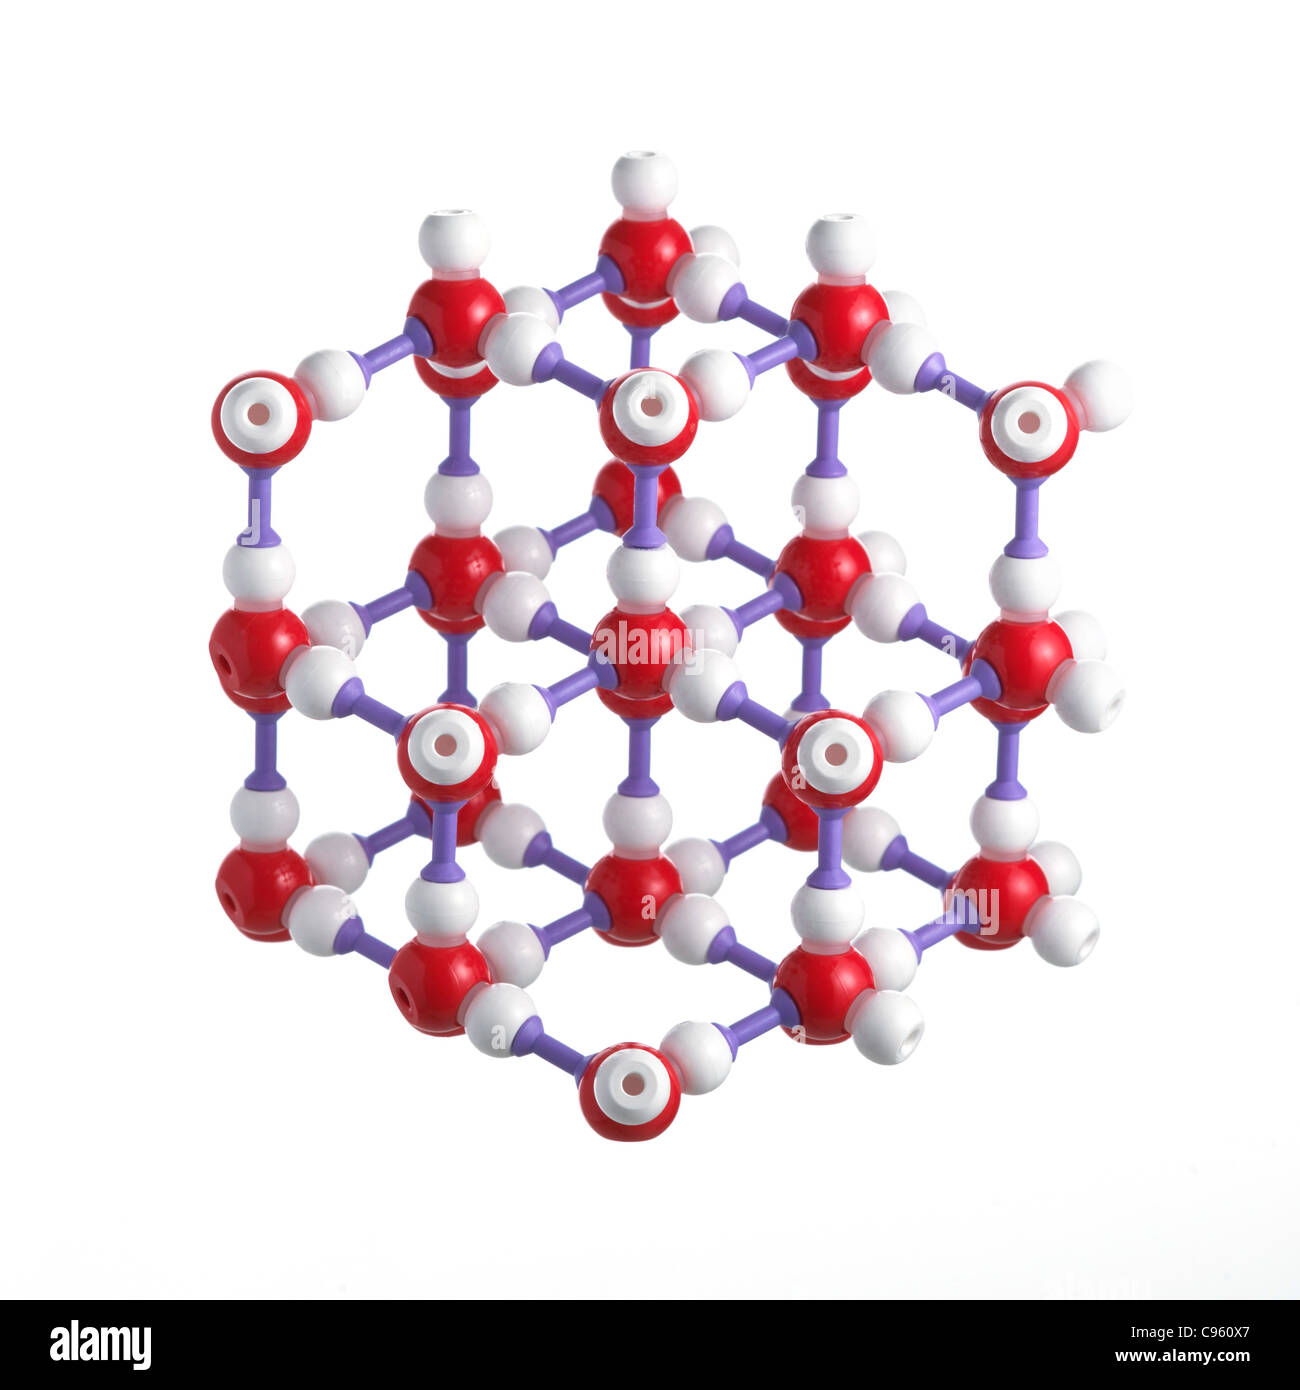 Ice lattice. Atoms are represented as spheres and are colour-coded: oxygen (red) and hydrogen (white). Stock Photo